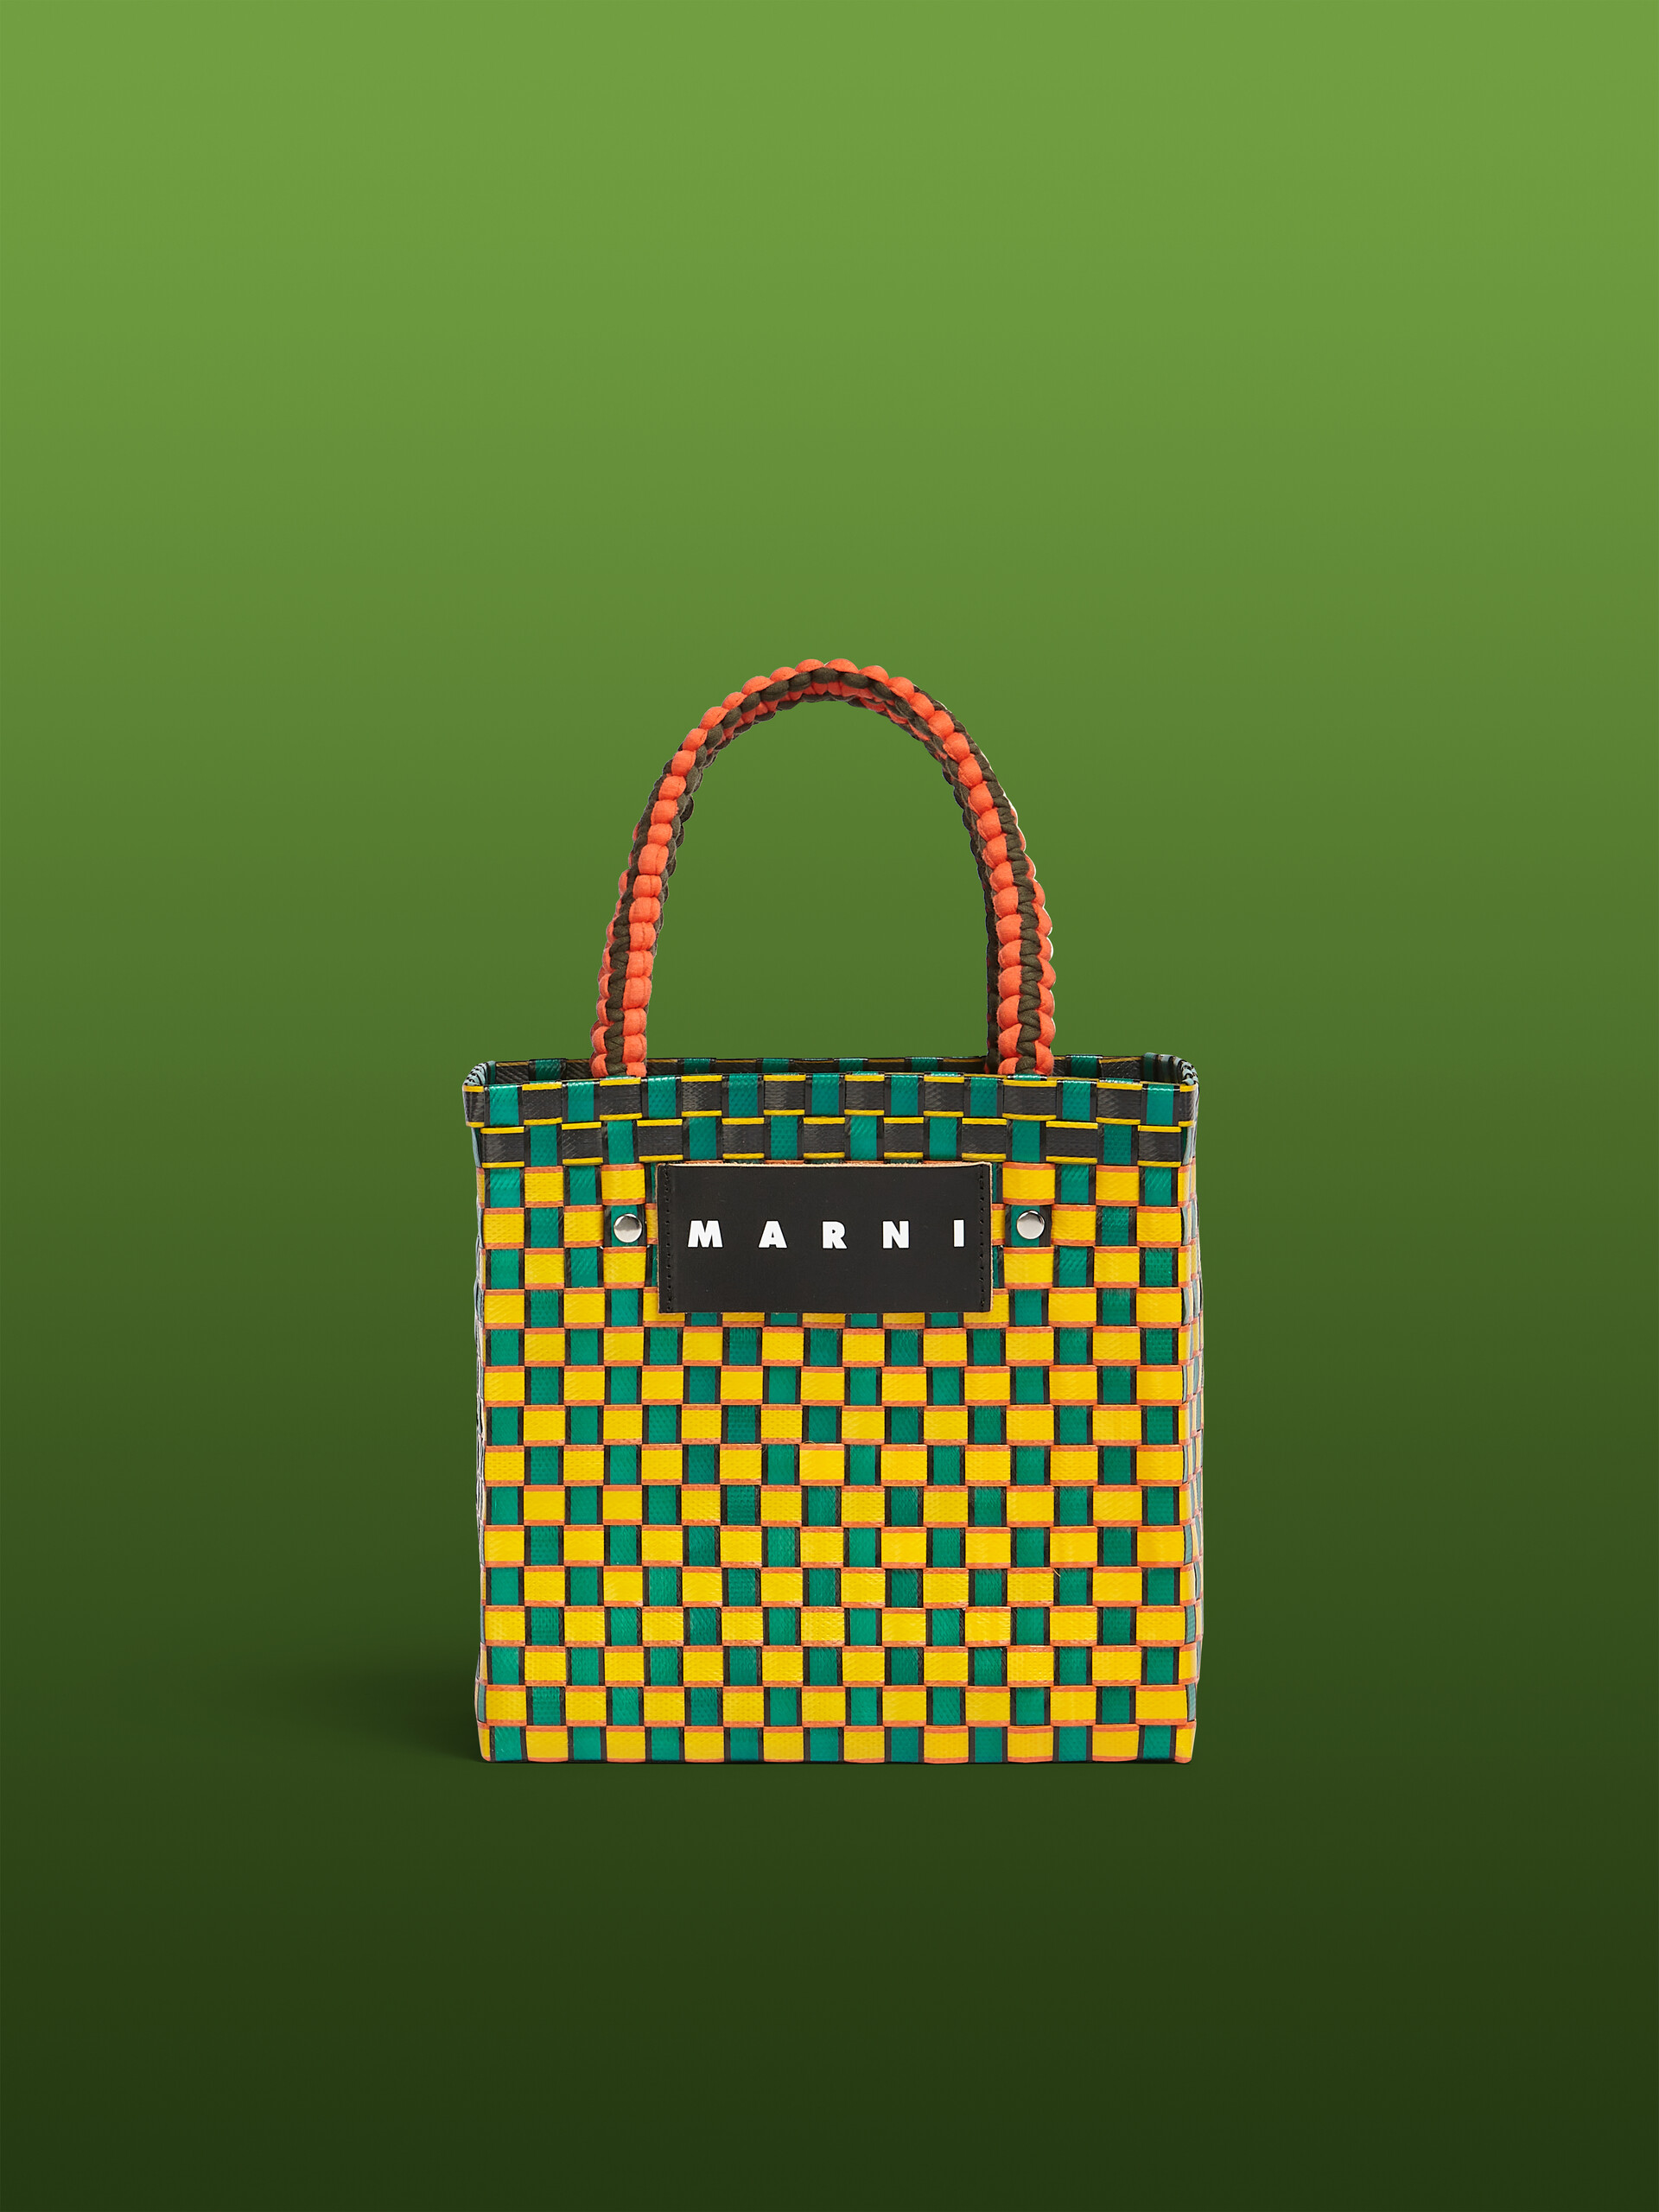 MARNI MARKET BASKET bag in yellow square woven material - Bags - Image 1